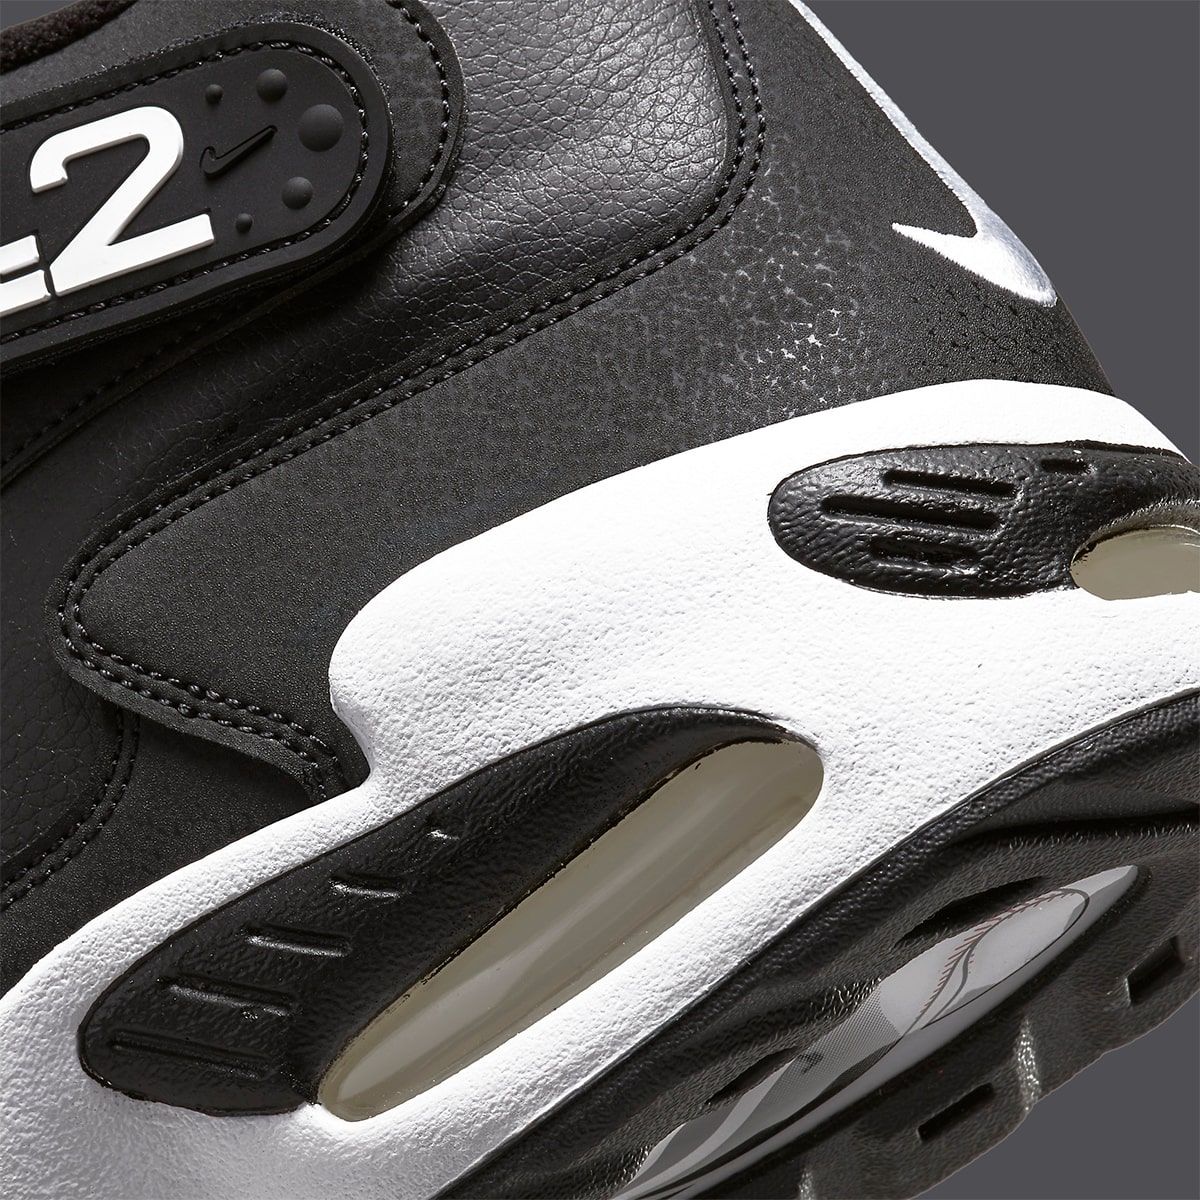 Nike Air Griffey Max 1 “Jackie Robinson” Arrives April 24th | HOUSE OF HEAT